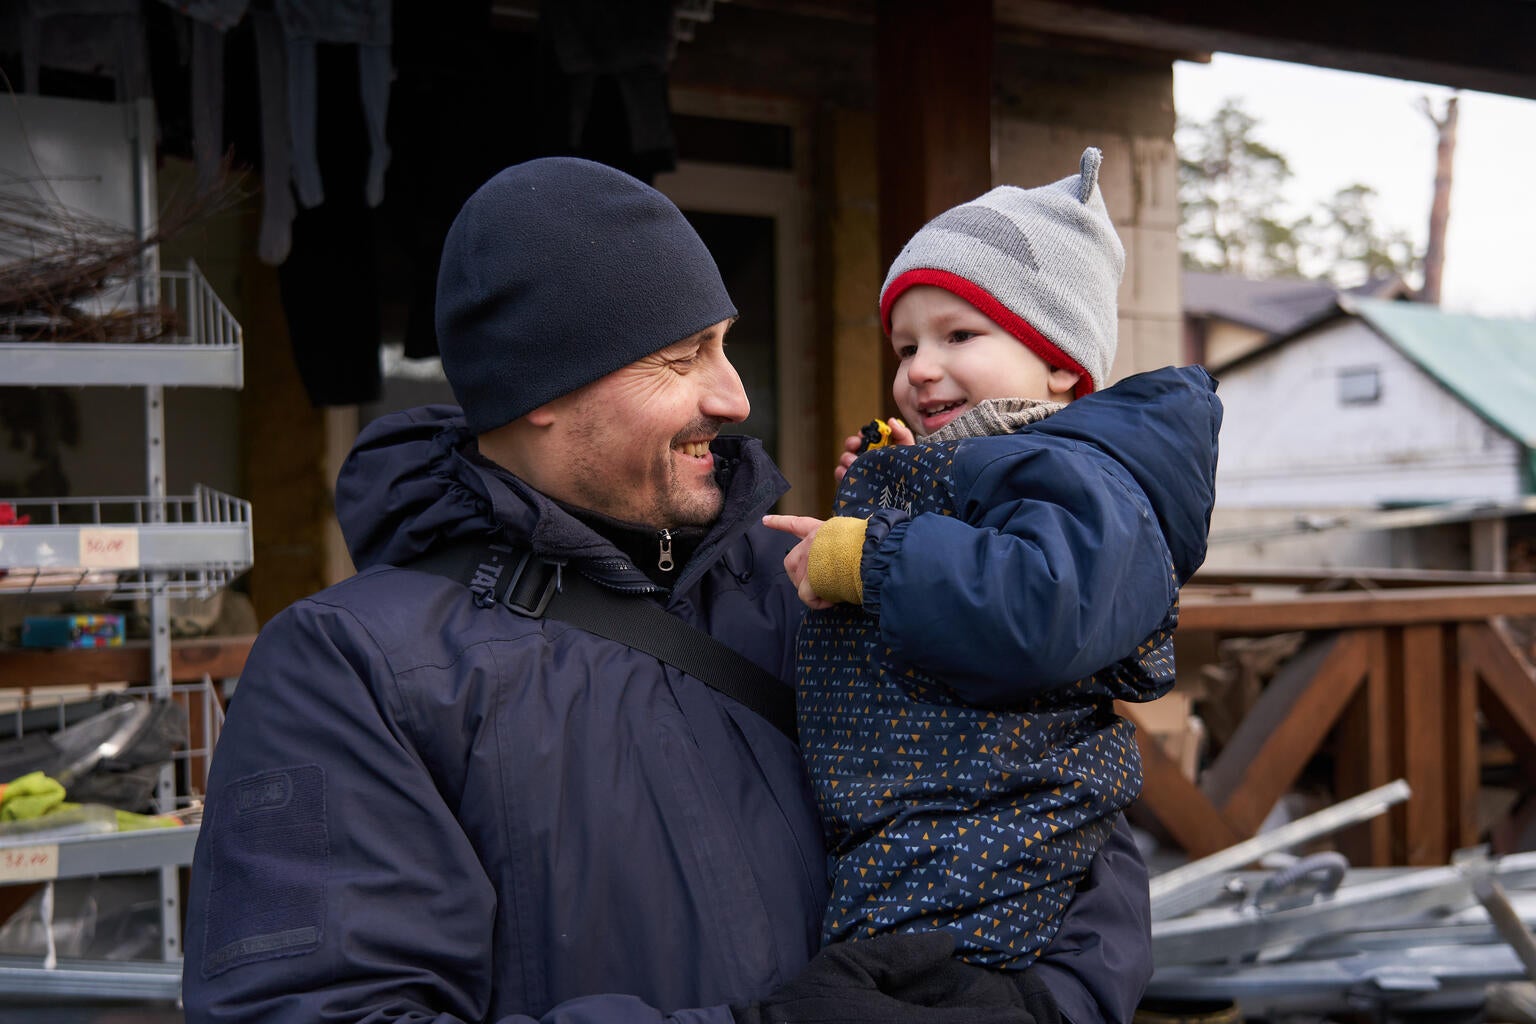 A father and son out the front of their destroyed home in Ukraine.